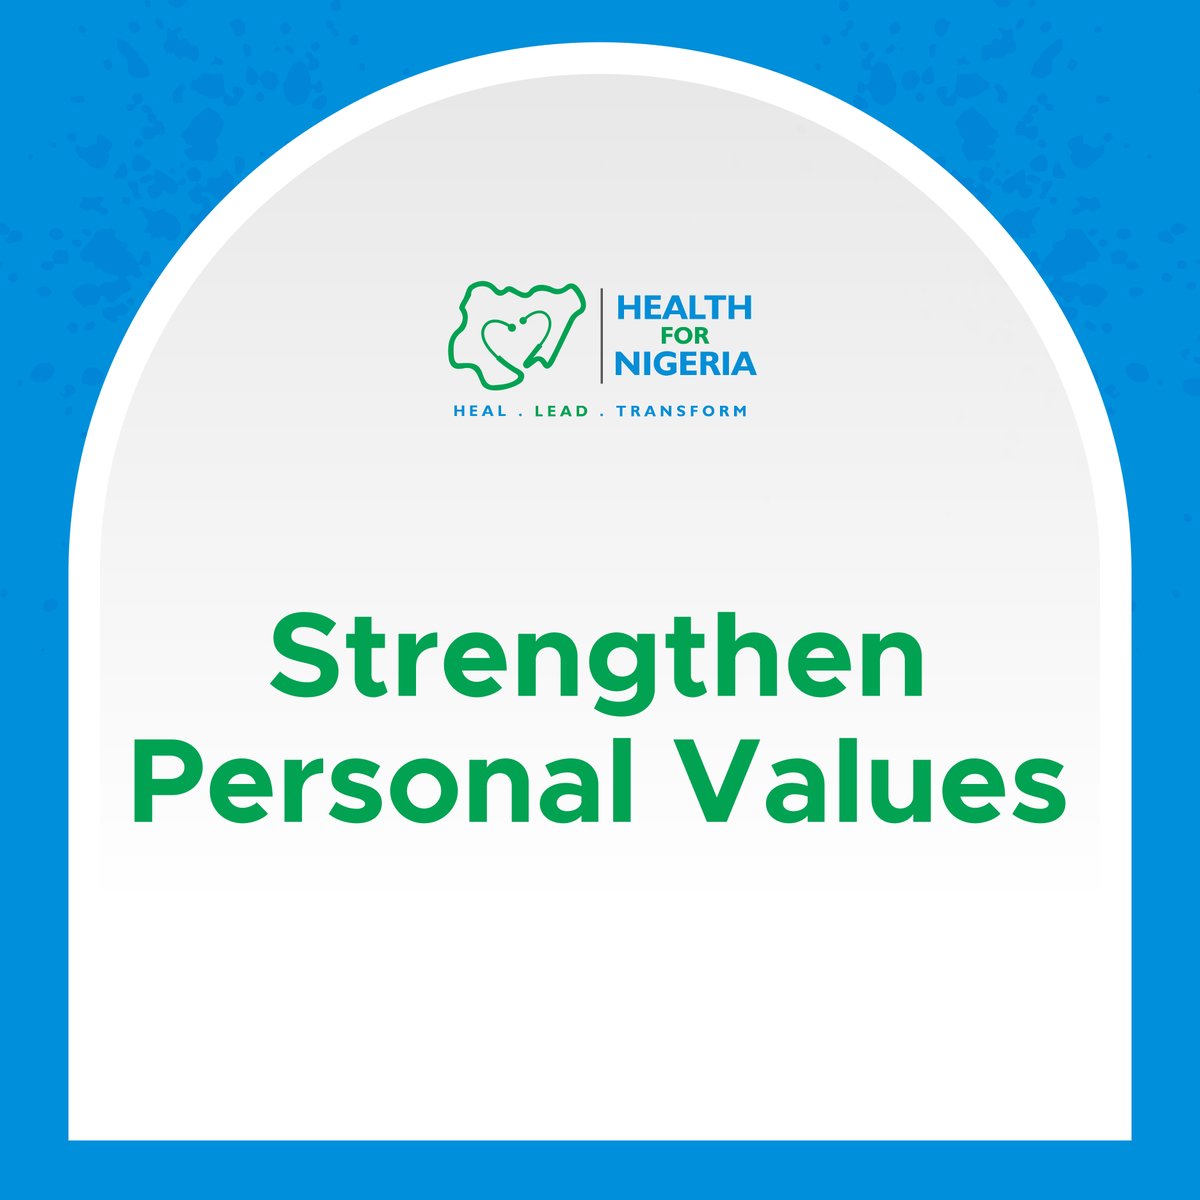 The power to enhance the lives of others is a privilege that comes with its own sense of obligation. By donating to a cause you believe in, you reinforce your personal values.

#PersonalValues #CharityOrganization #HealthForNigeria